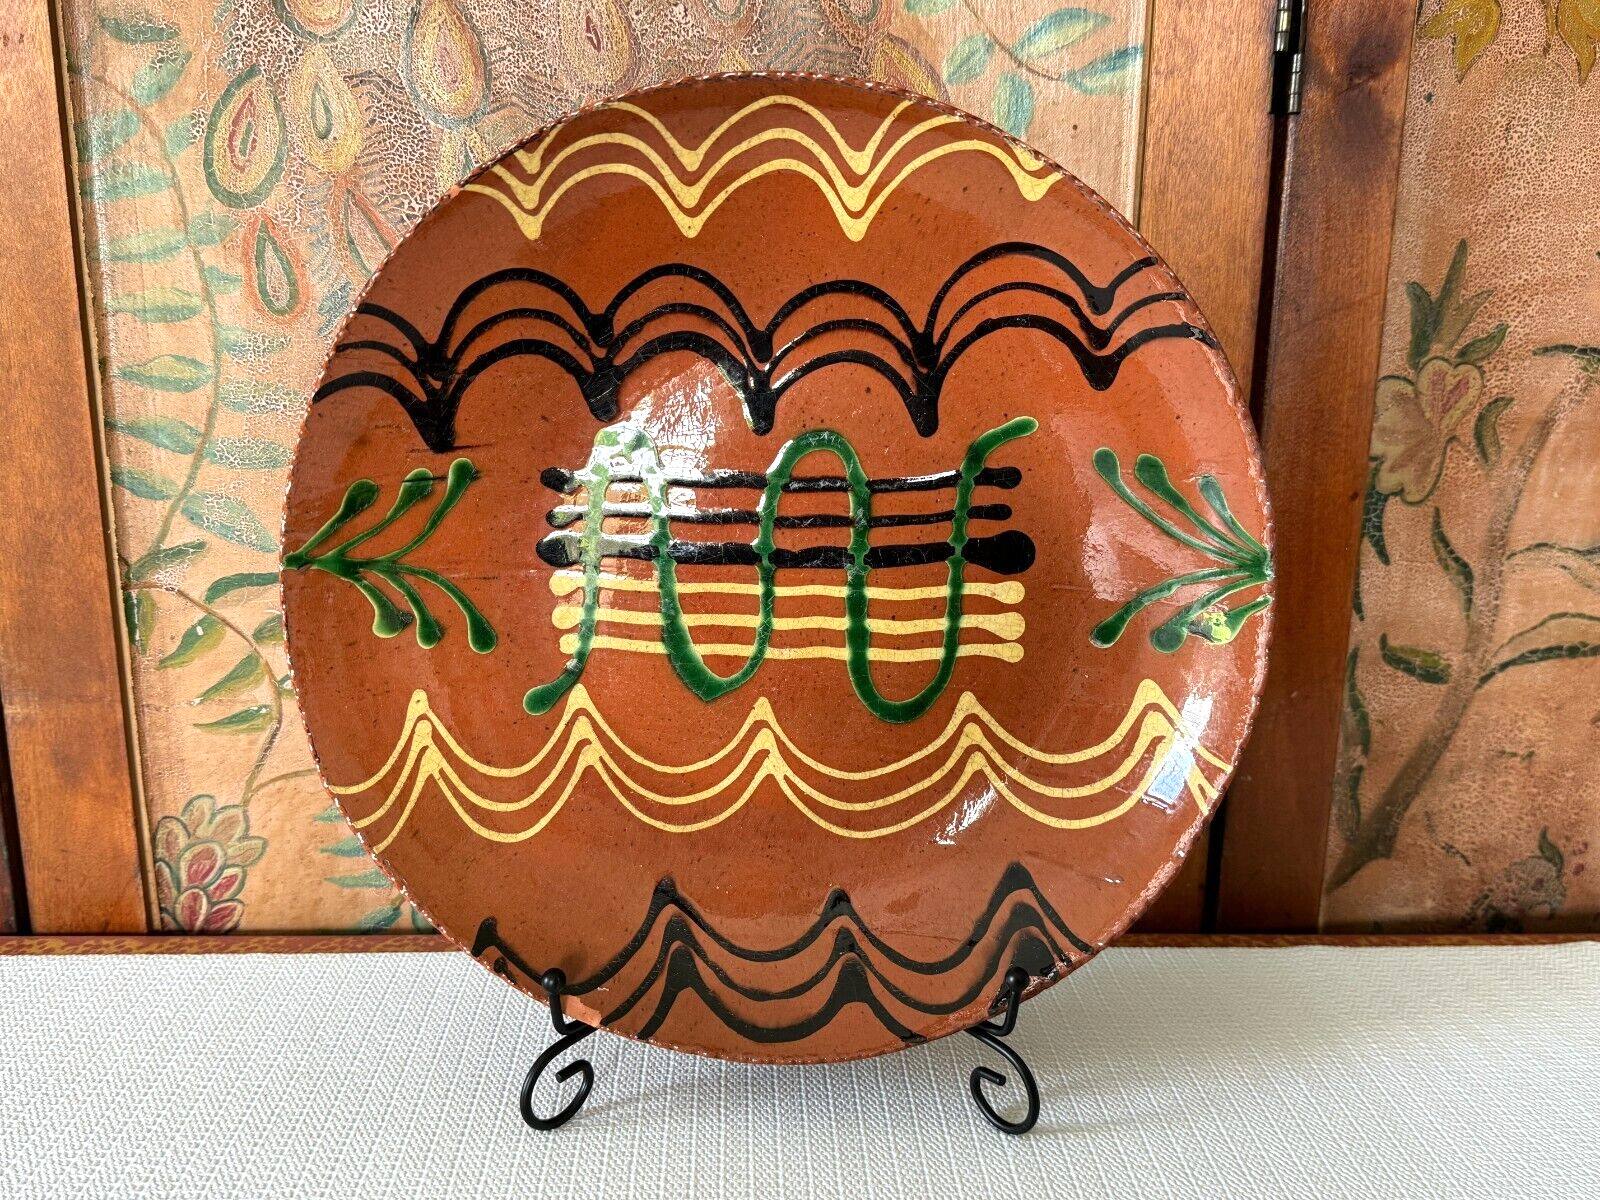 Contemporary Turtle Creek Potter Betty Lou Folk Art Redware Charger Plate - 2018